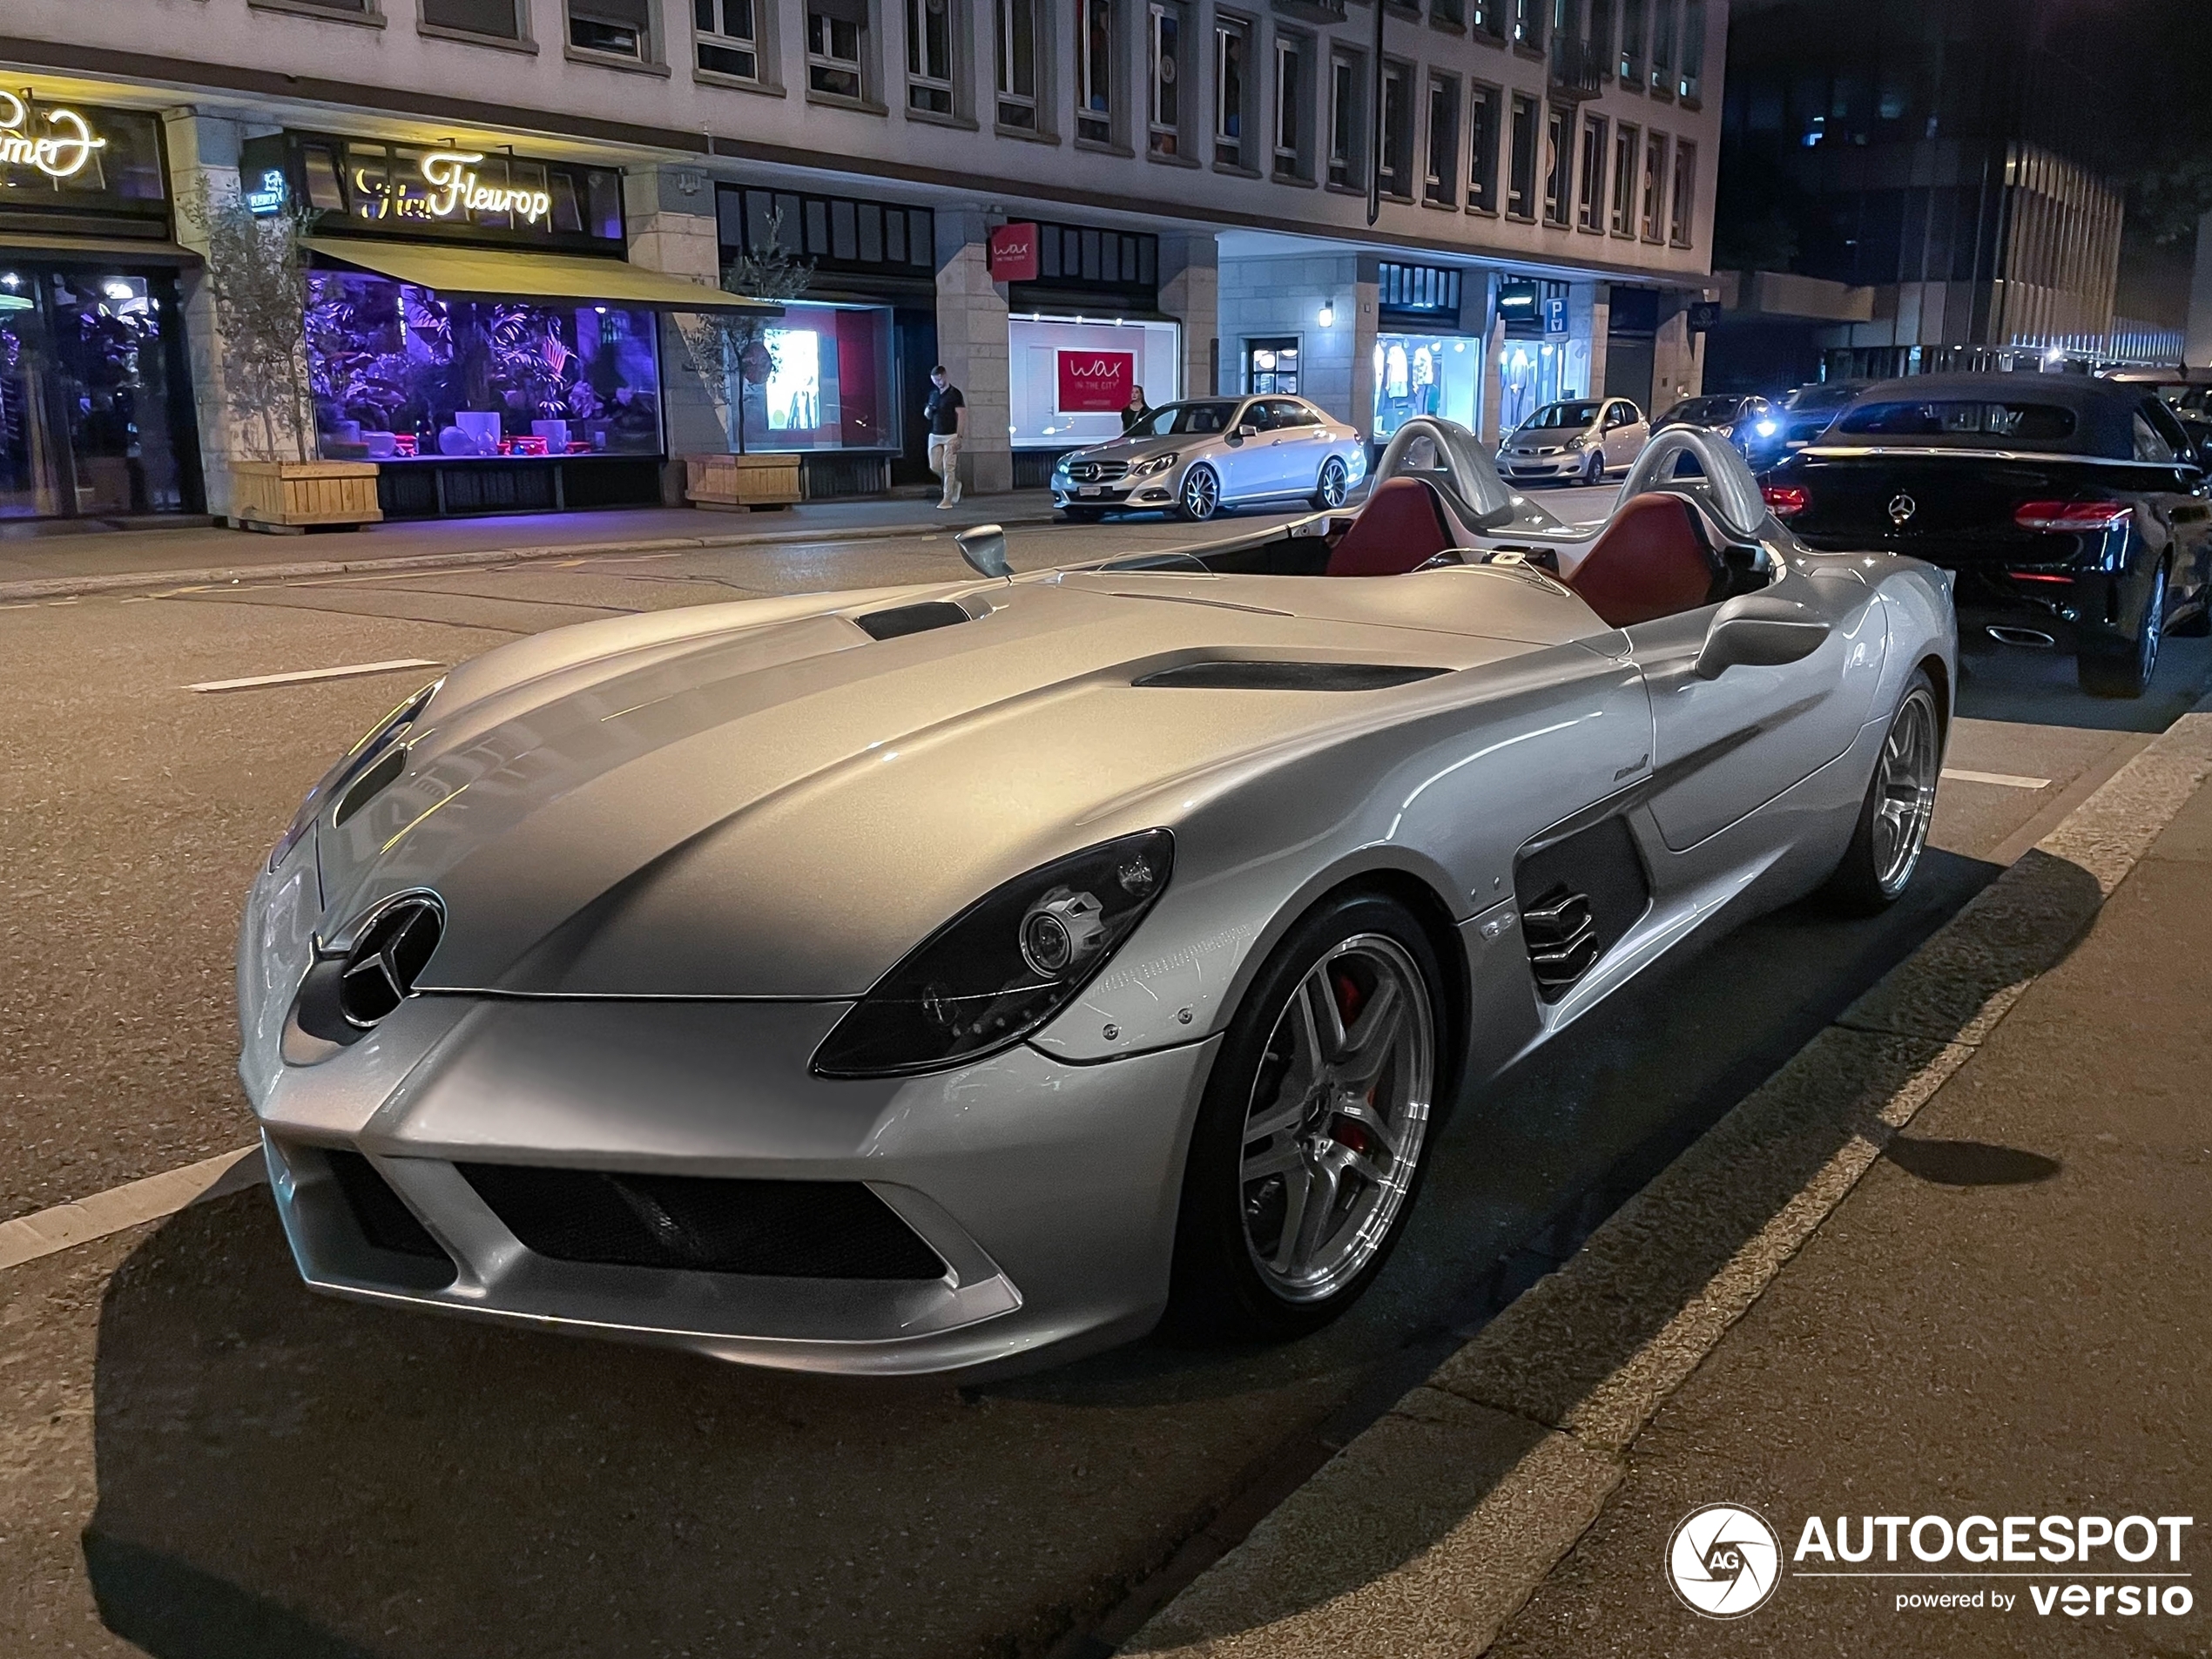 This is the very first Stirling Moss in Zurich